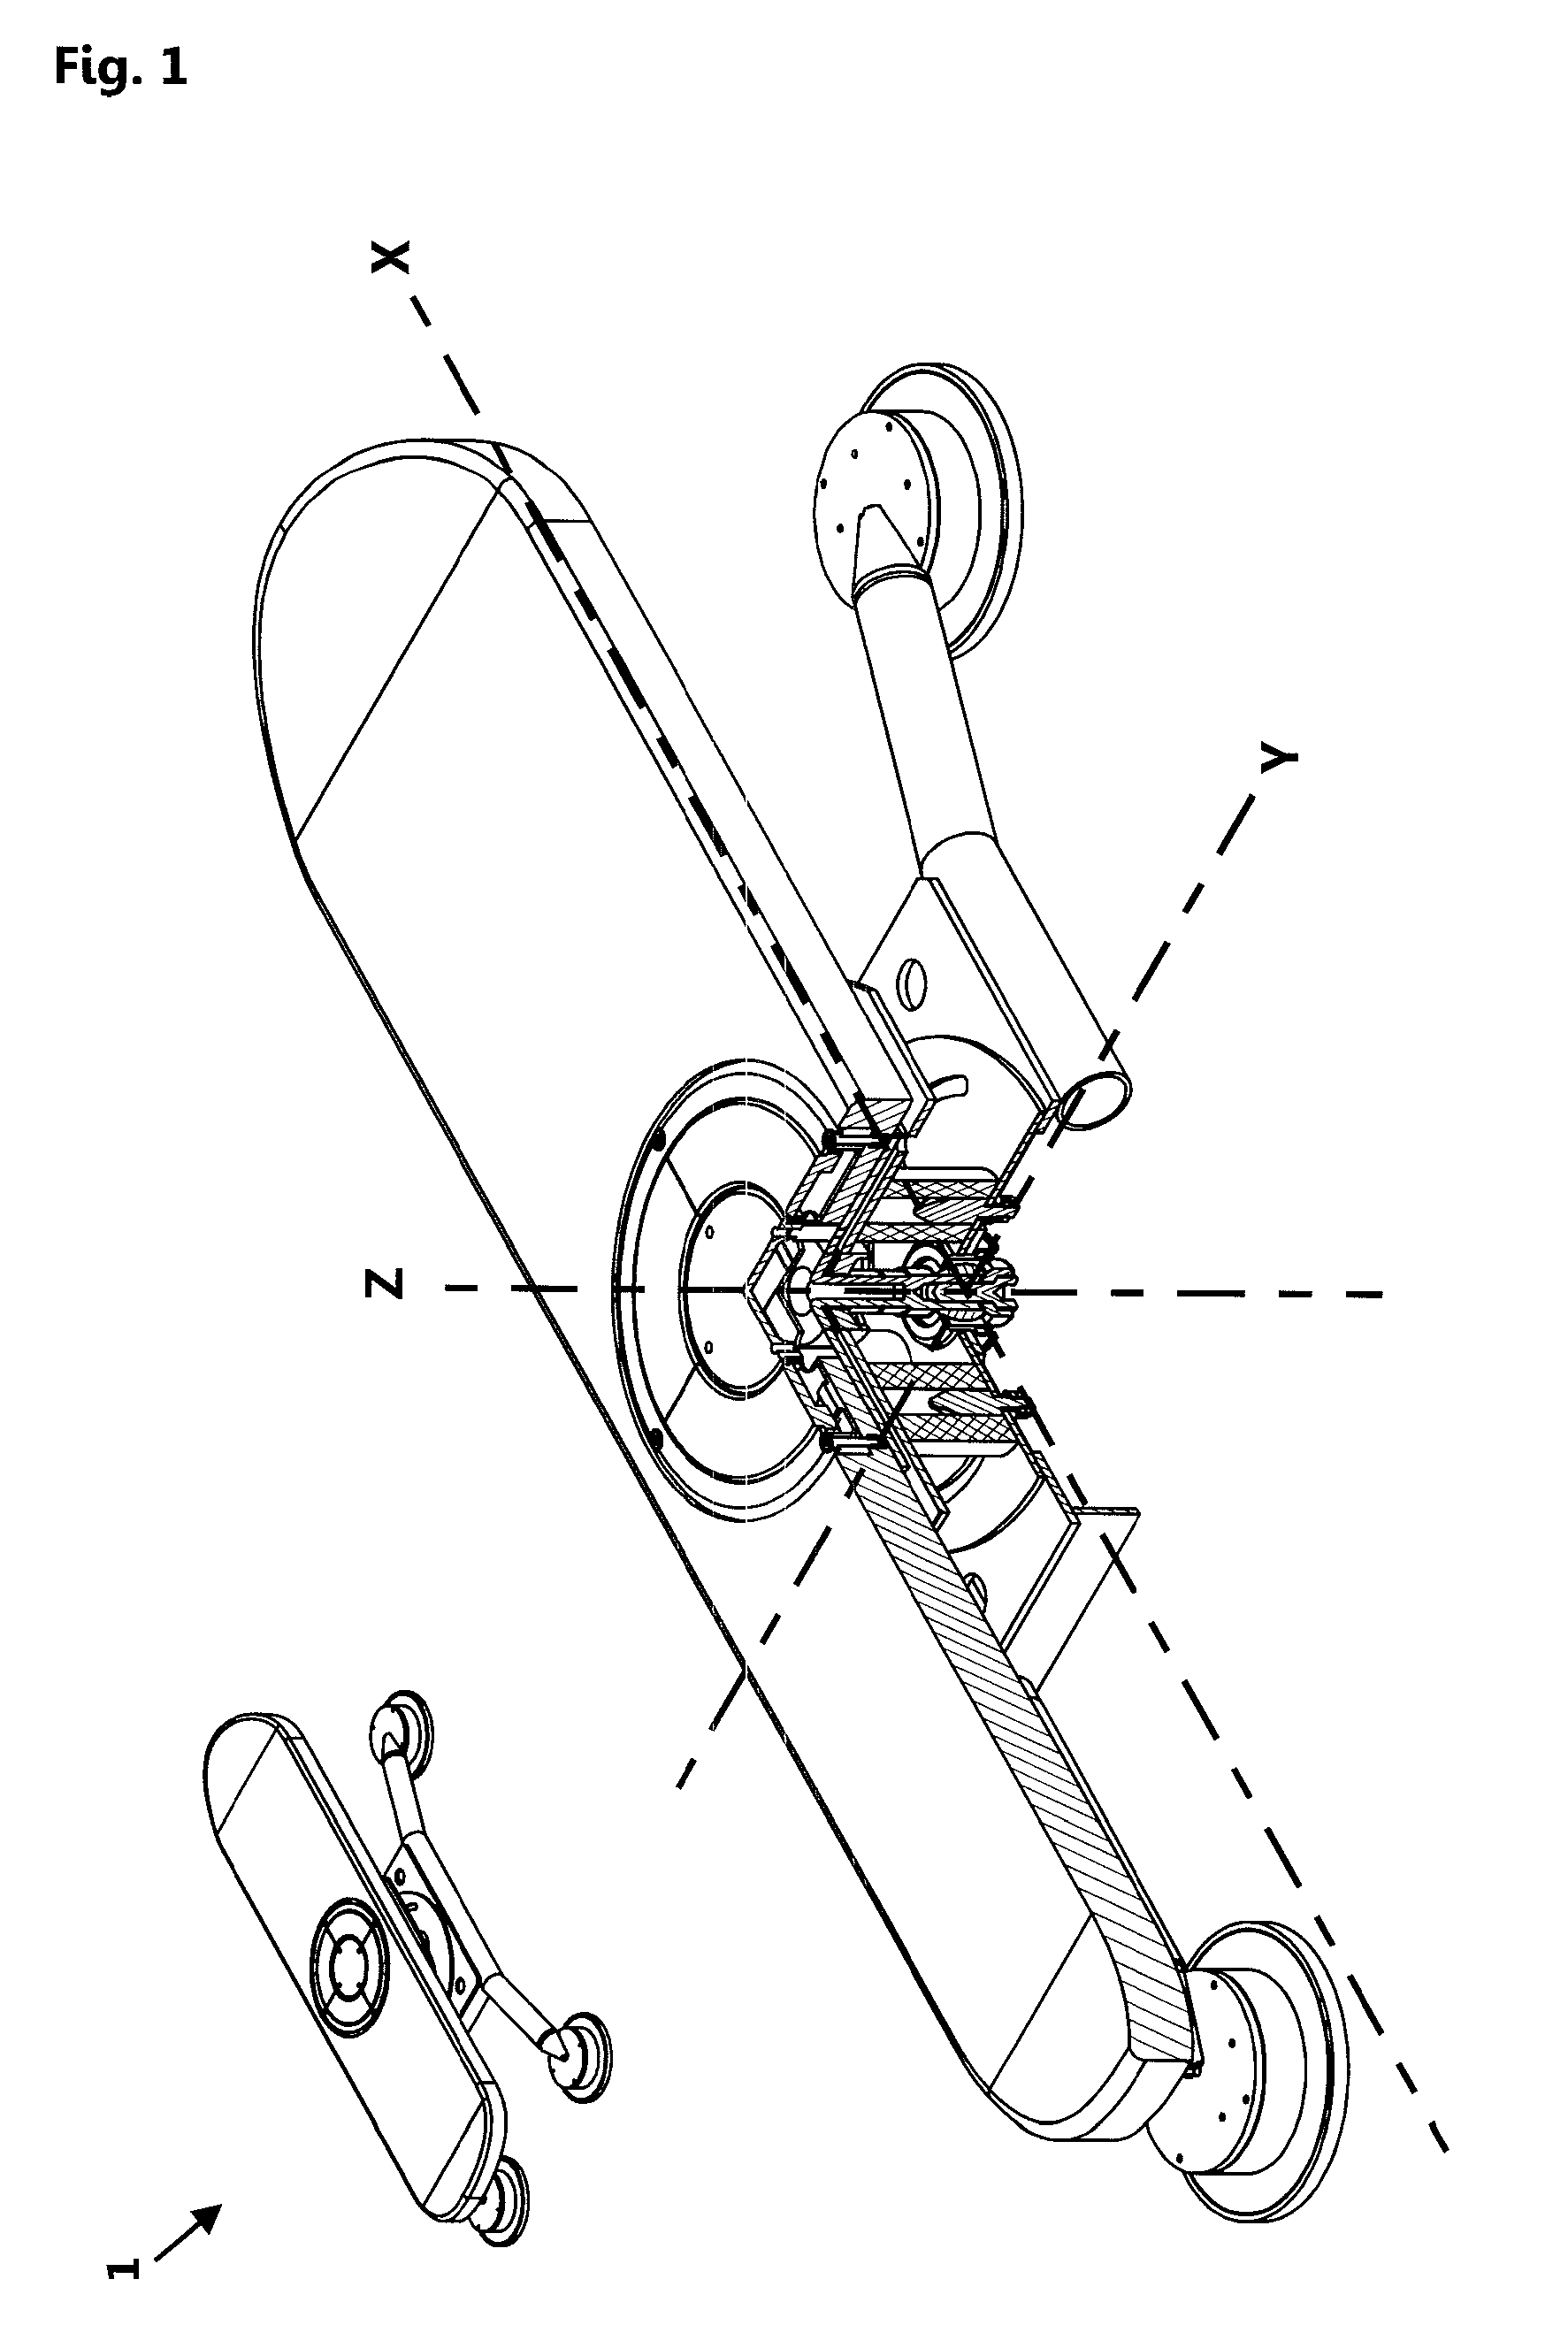 Device for balance exercises and balance games using variable restoring forces